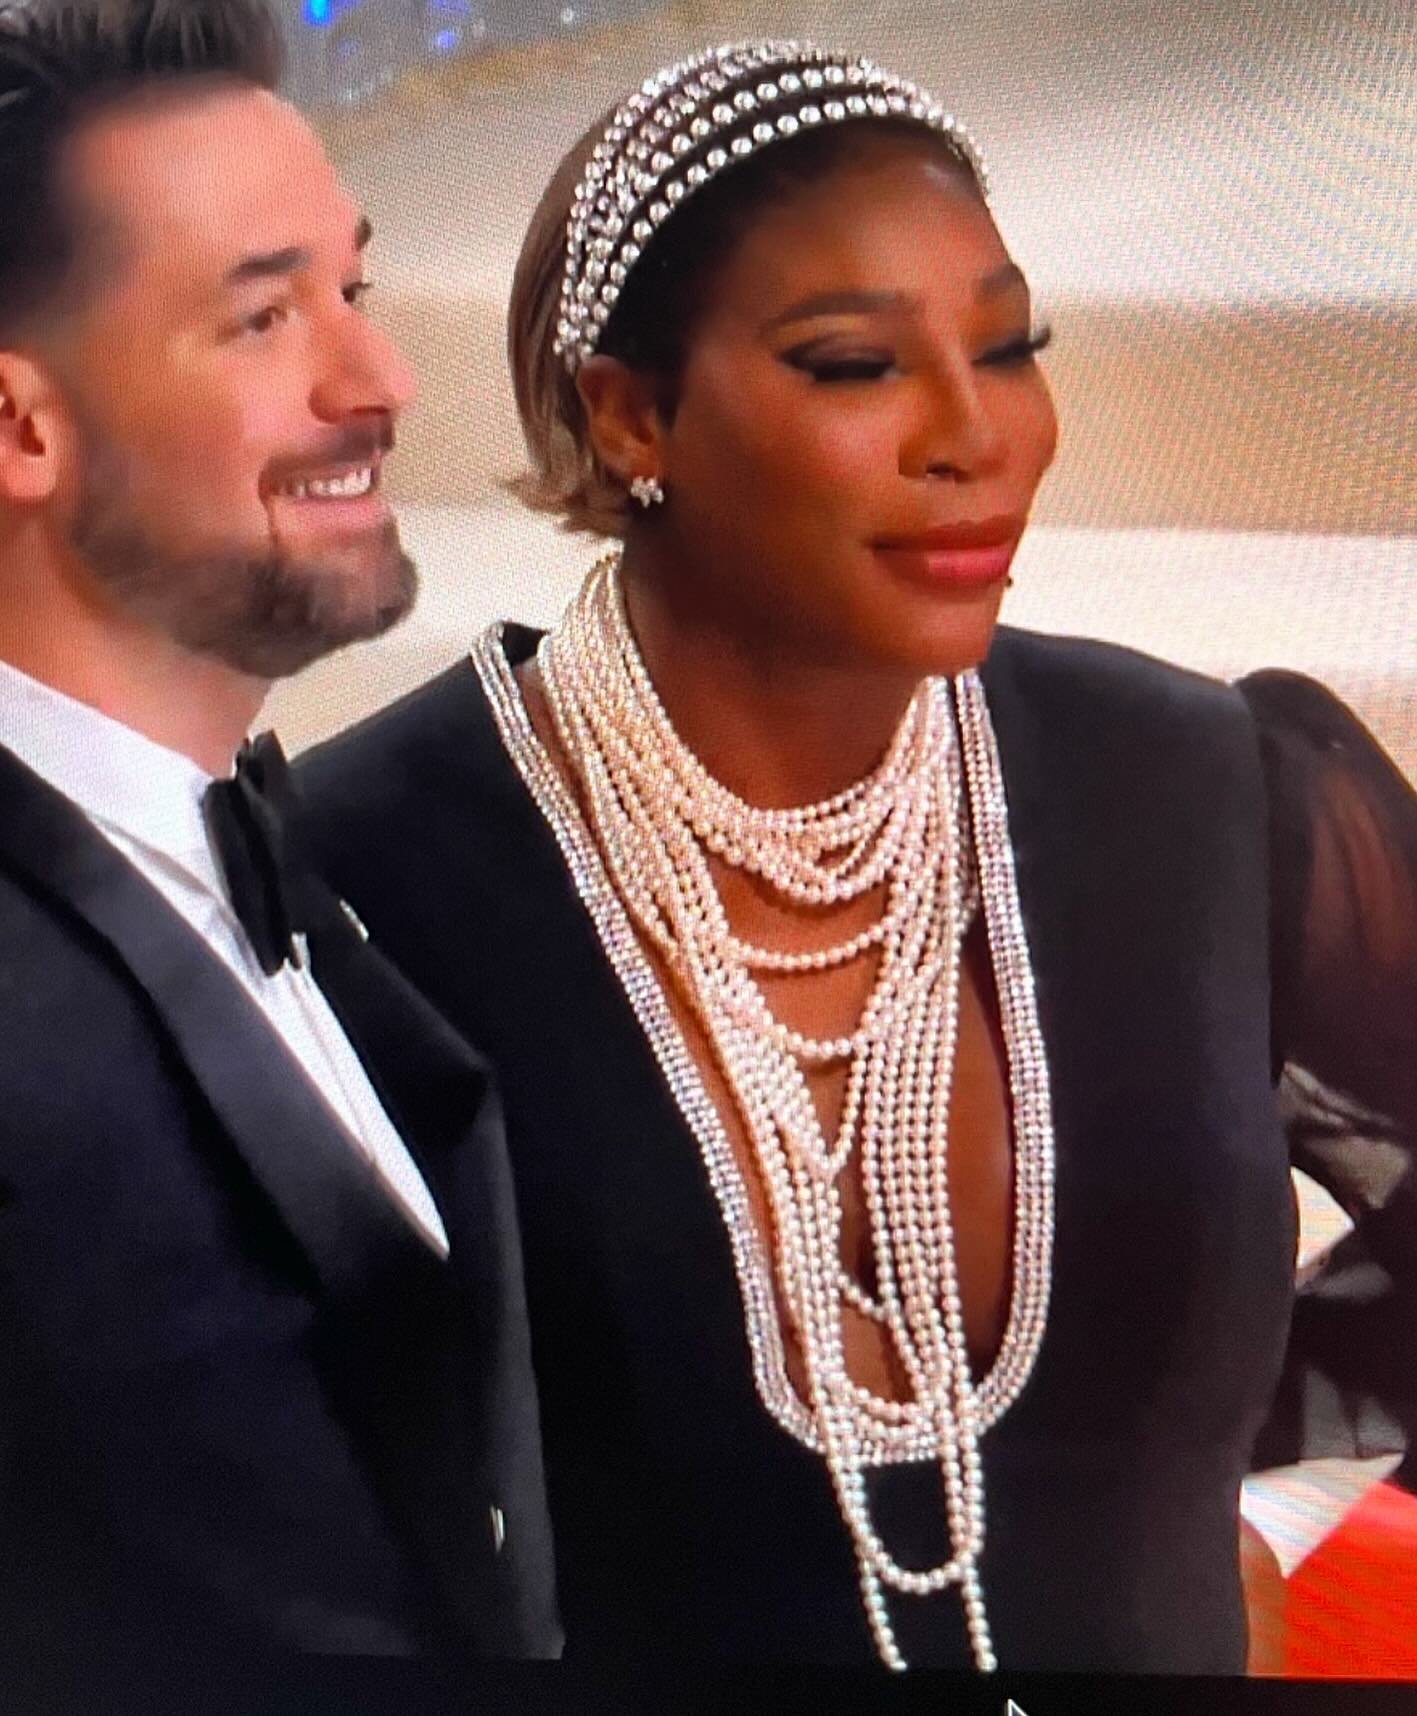 #fashionflashbackfriday Back to @serenawilliams #metball look last year. Seen here with husband Alexis Ohanian, she wore a @gucci gown and lots of pearls, great look for her. Wonder what she&rsquo;ll wear next Monday night?